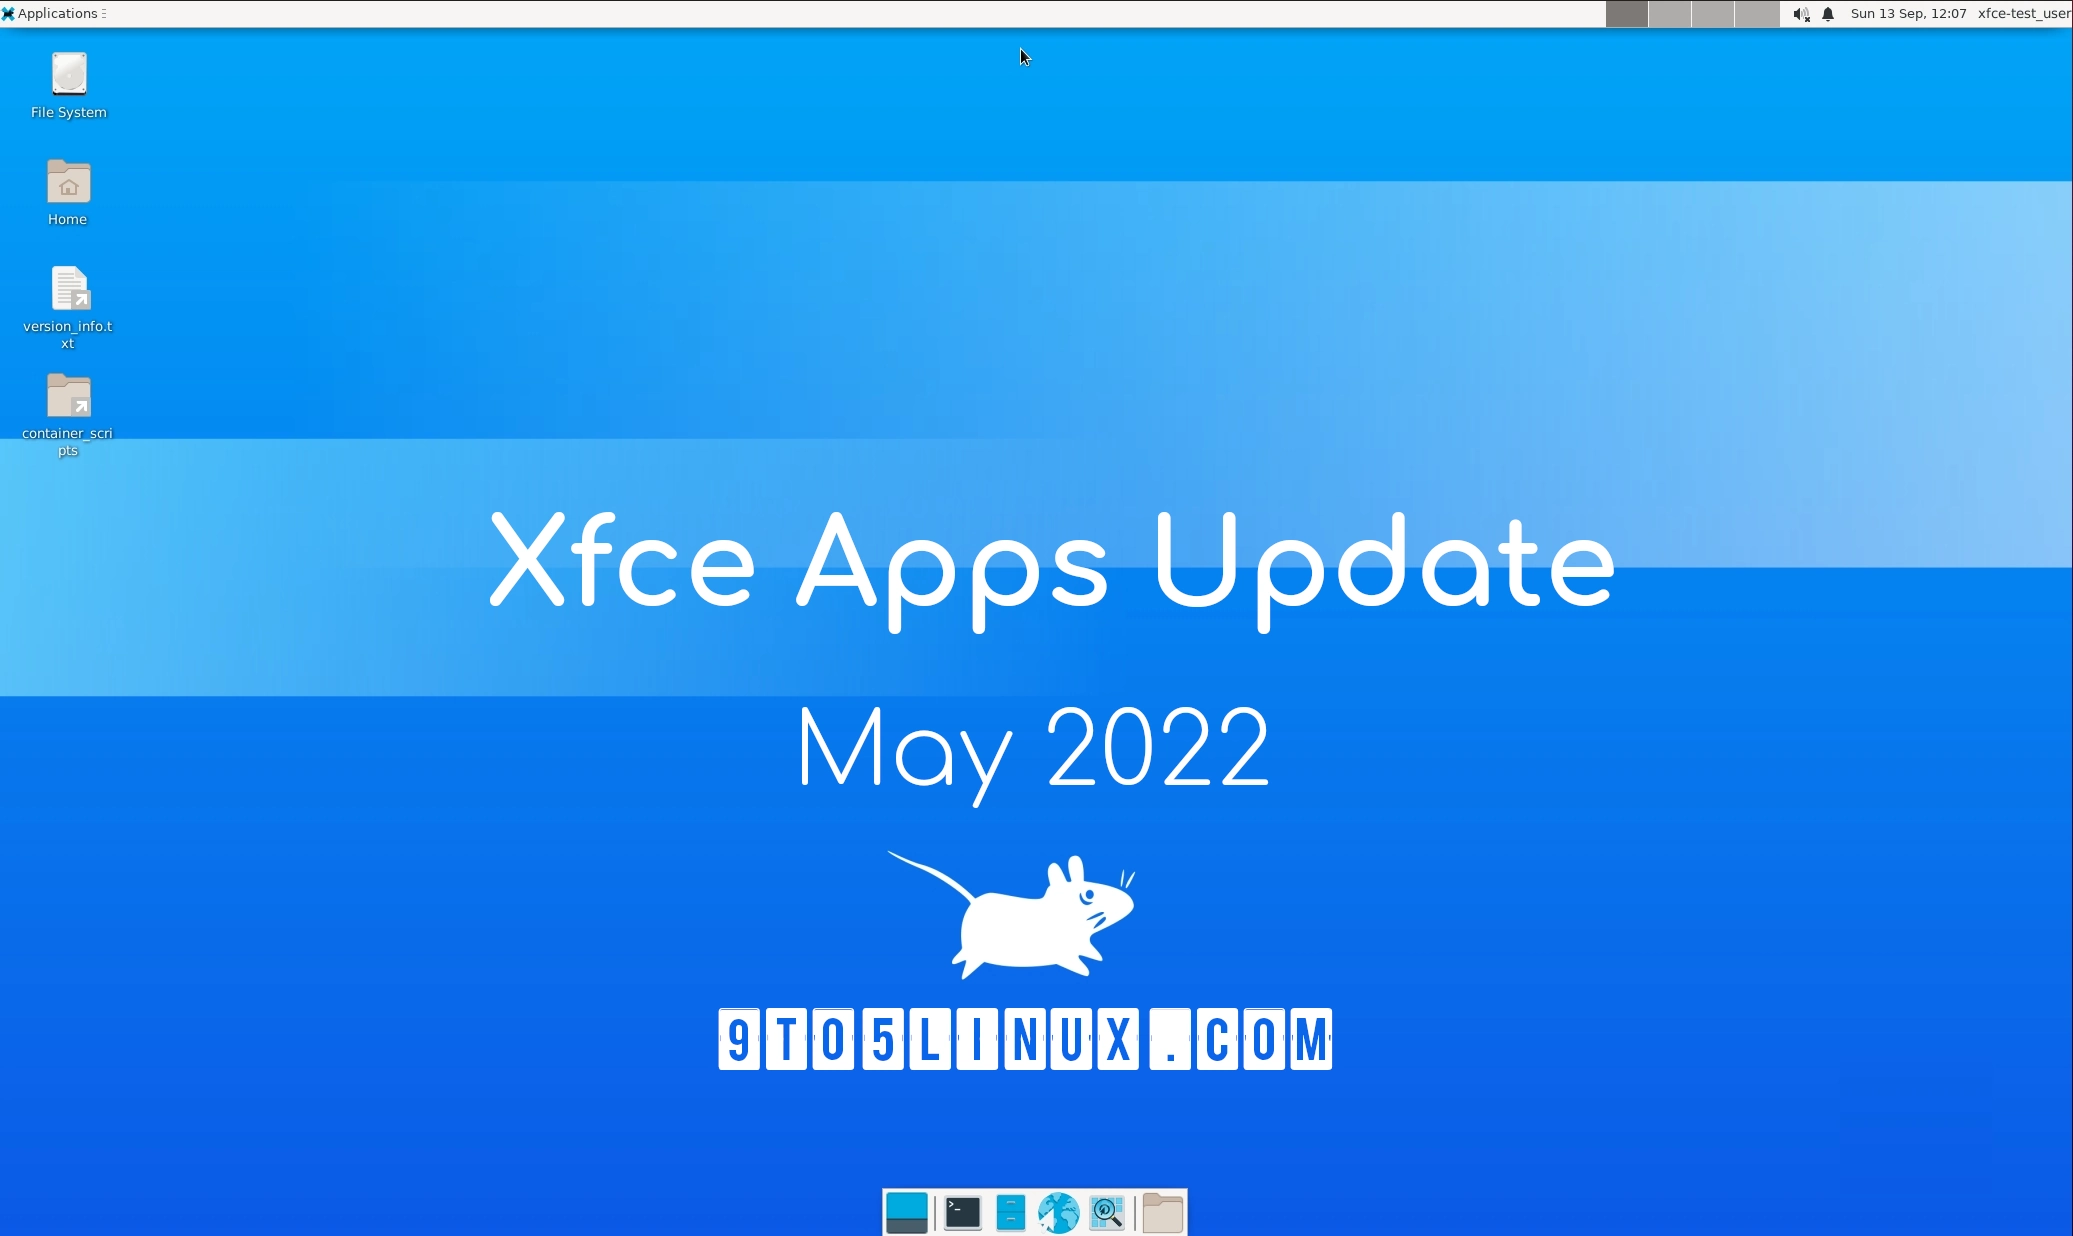 Xfce’s Apps Update for May 2022: New Releases of Xfce Terminal, Panel, and Task Manager